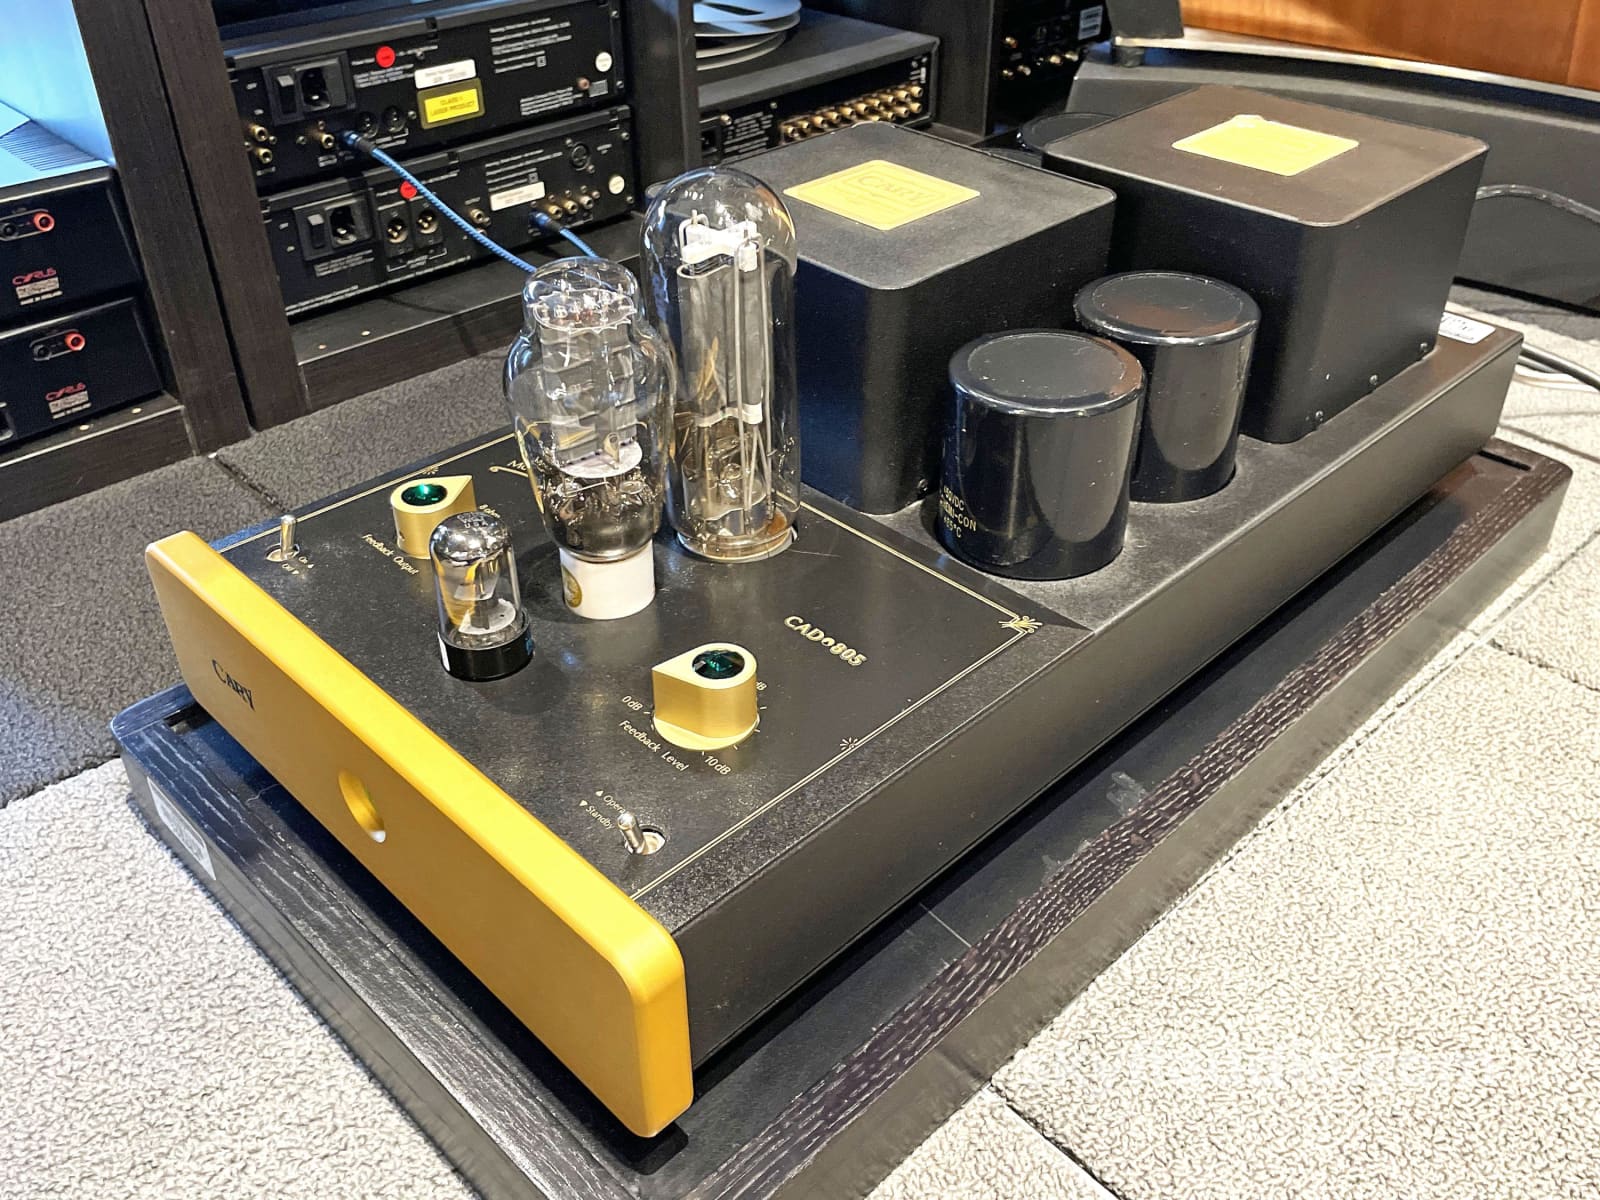 Cary Audio Design Cad-805 - Single-Ended Tube Monoblock Amplifiers With Matching Stands Amplifier